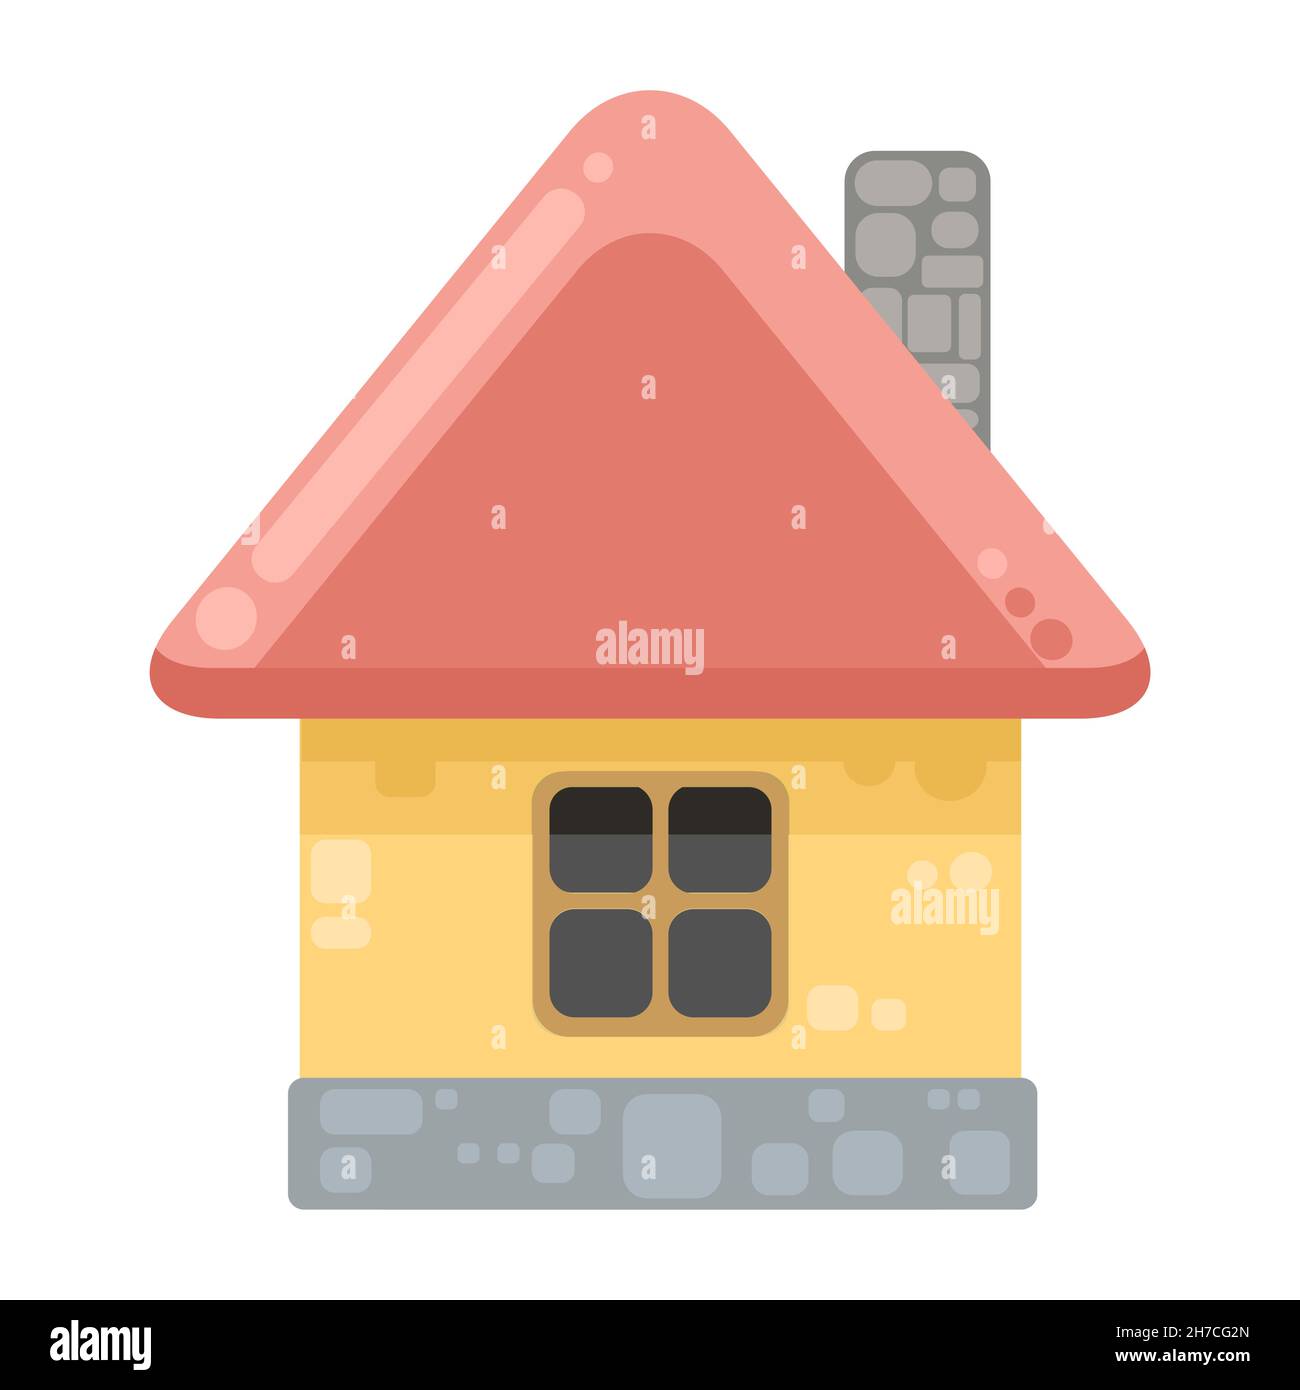 Small country house with orange walls and red roofs. Funny cartoon style. Country suburban village. Traditional simple architecture. Illustration for Stock Vector